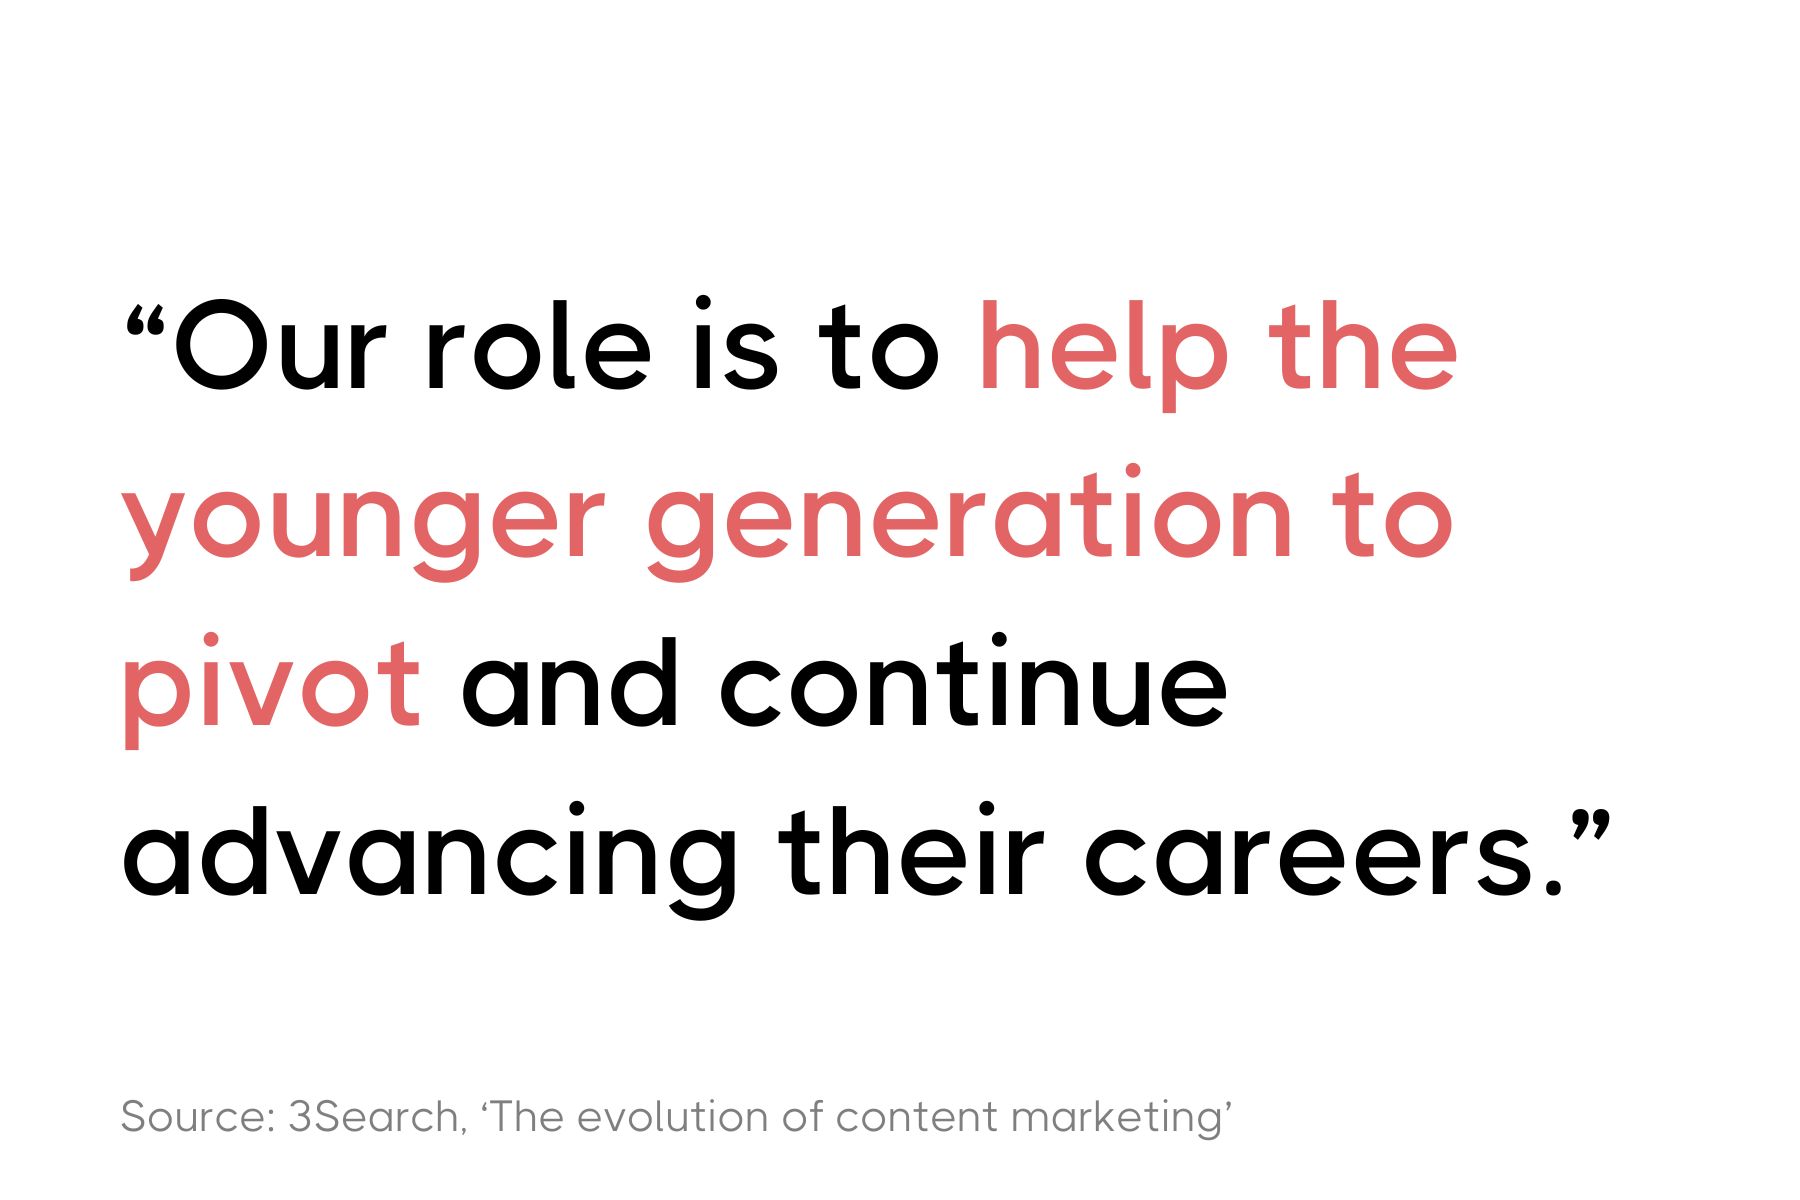 The image displays the quote: "Our role is to help the younger generation to pivot and continue advancing their careers." This statement is sourced from 3Search, from an article titled 'The evolution of content marketing.' The text is presented in a bold, modern font and is set against a clean, unembellished background to emphasize the message of mentorship and career guidance.